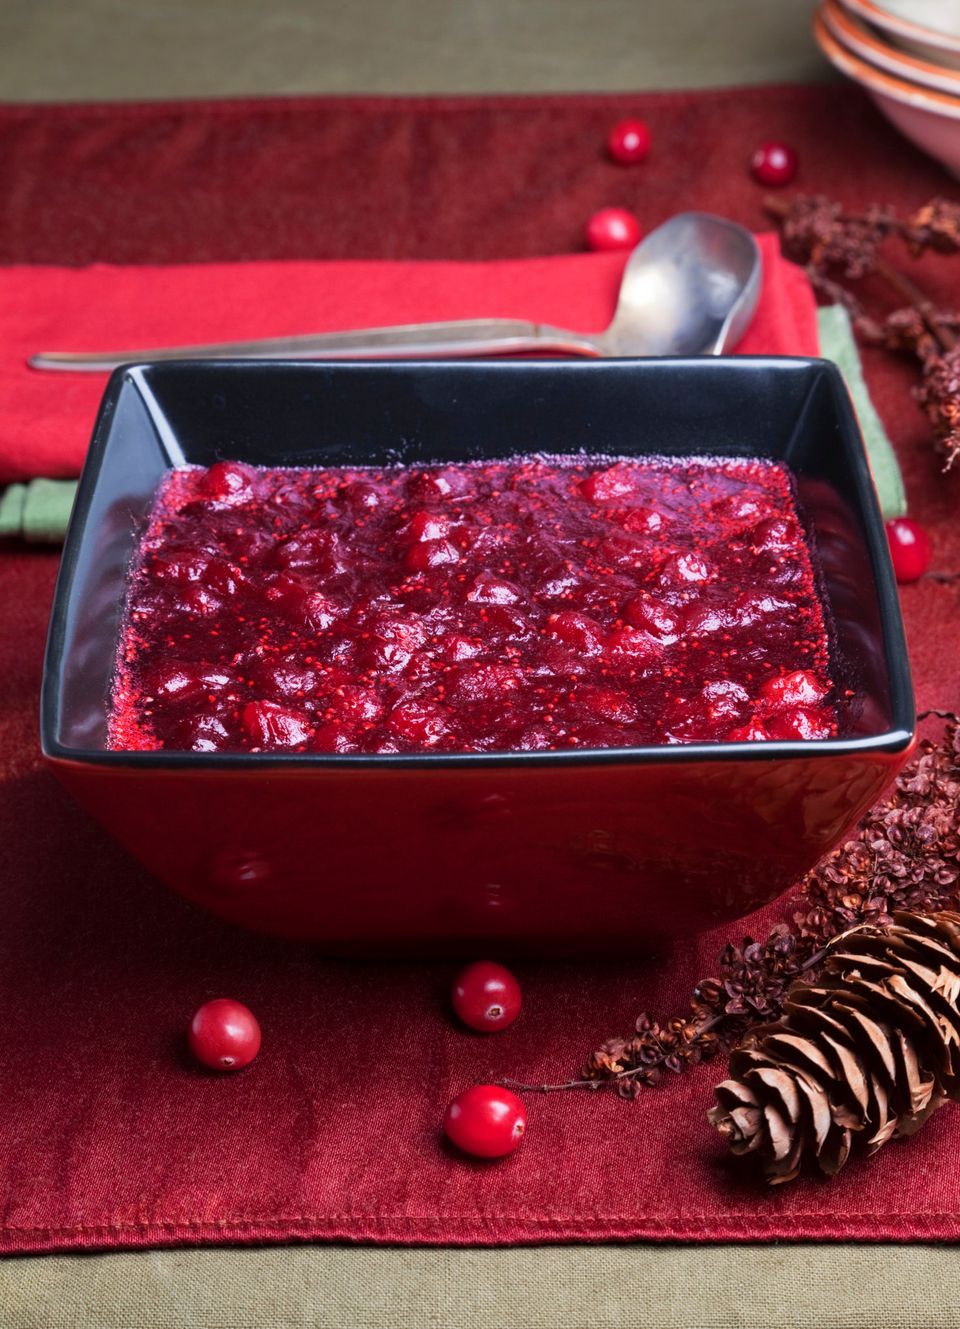 "Specifically For Rick" Cranberry Sauce